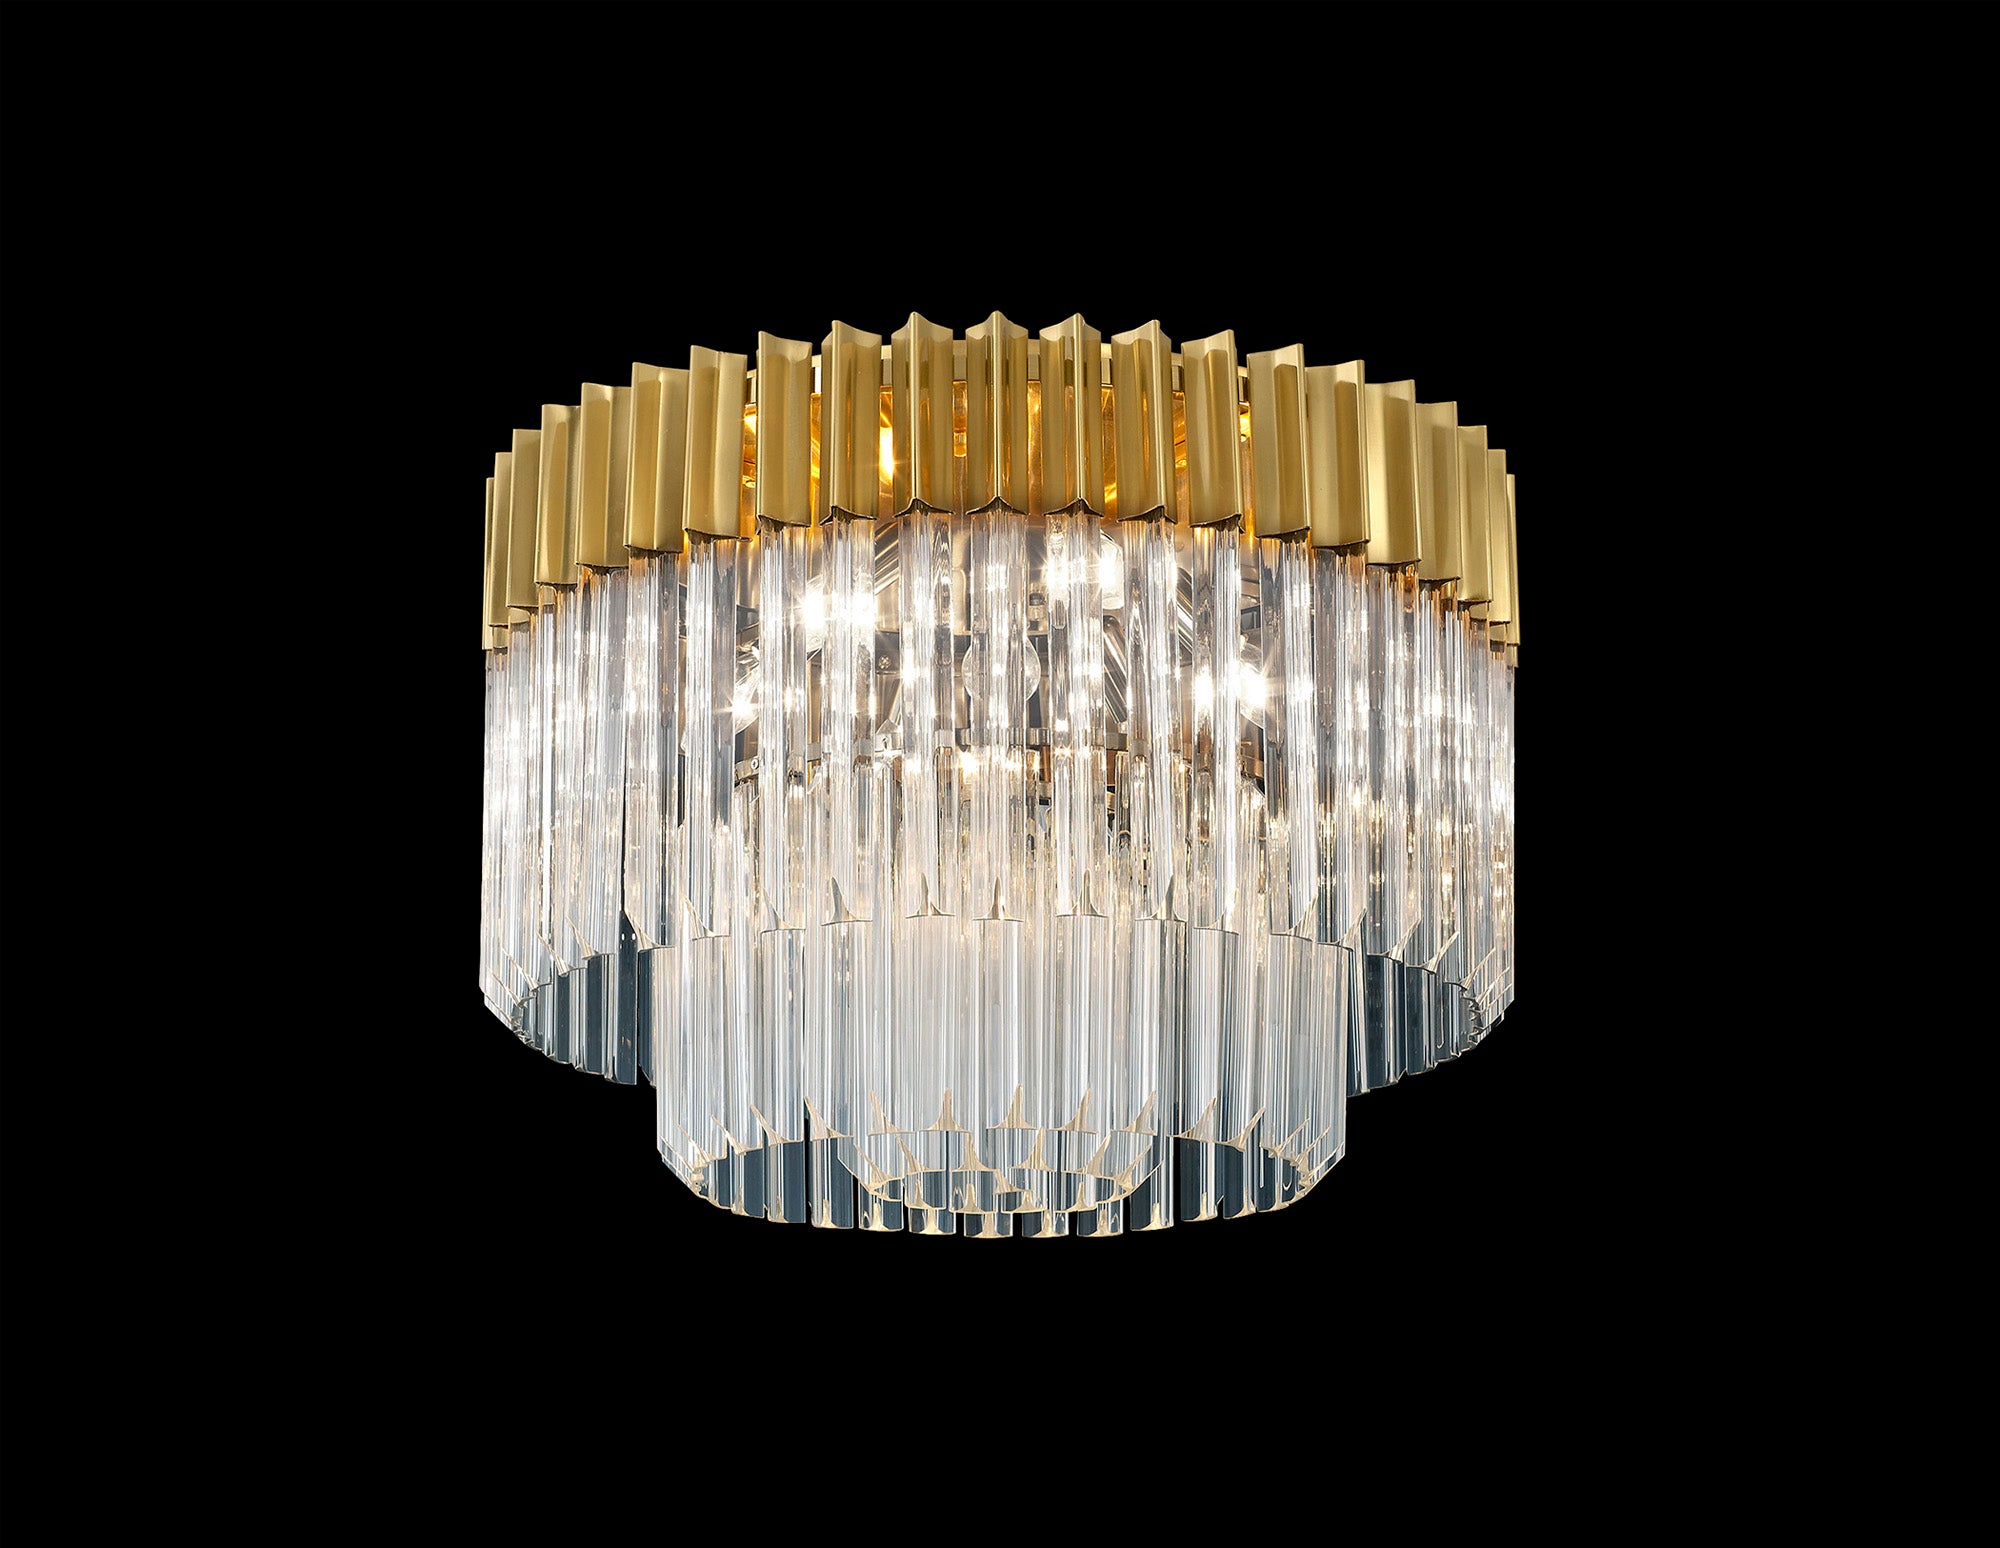 Knightsbridge Ceiling Round 7 Light E14, Brass/Clear Glass - LO182283. Item Weight: 15.3kg